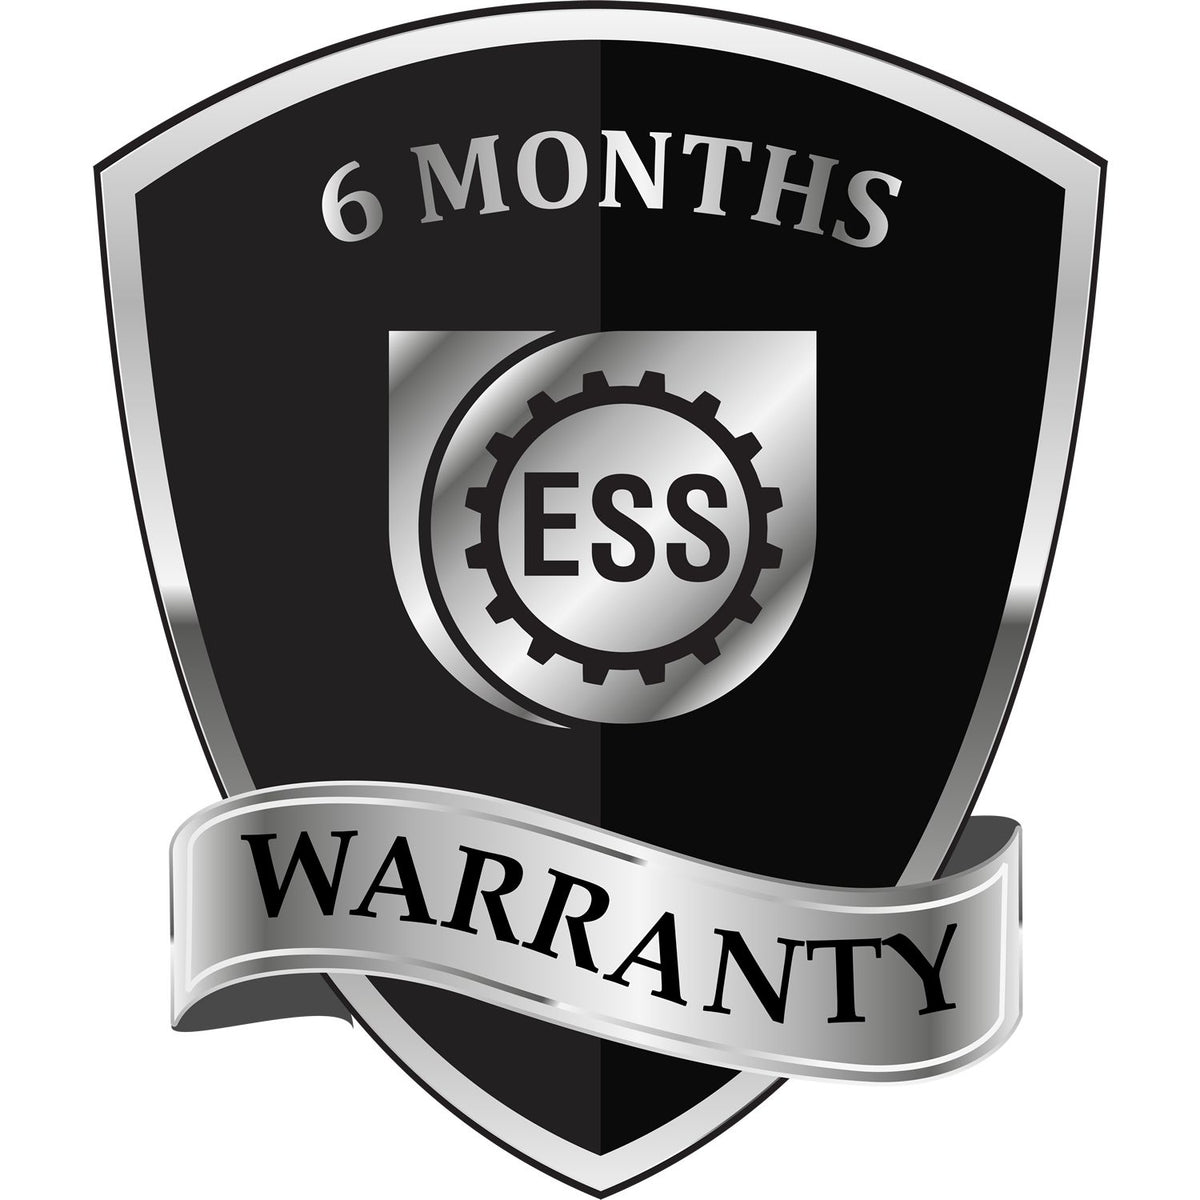 A badge or emblem showing a warranty icon for the Heavy-Duty Missouri Rectangular Notary Stamp